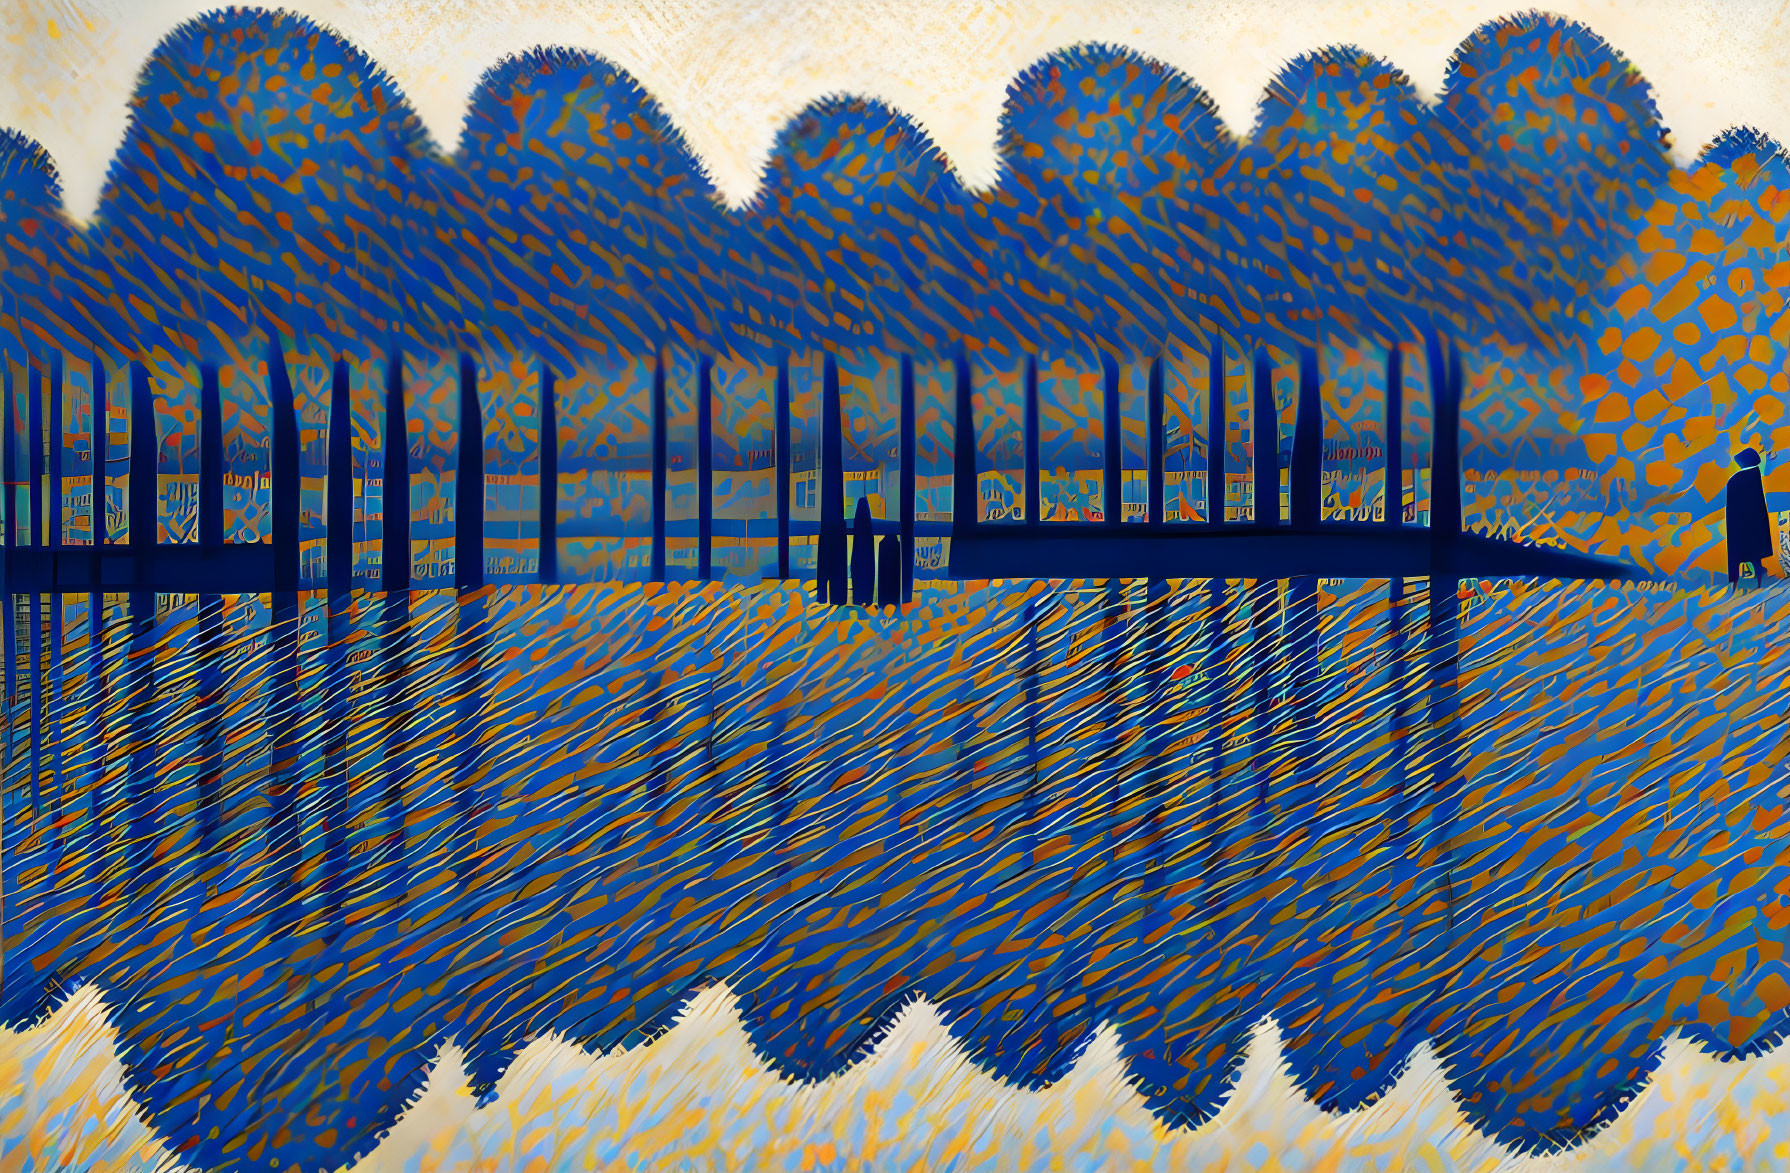 Abstract Pier Image with Blue Railing and Patterned Overlay